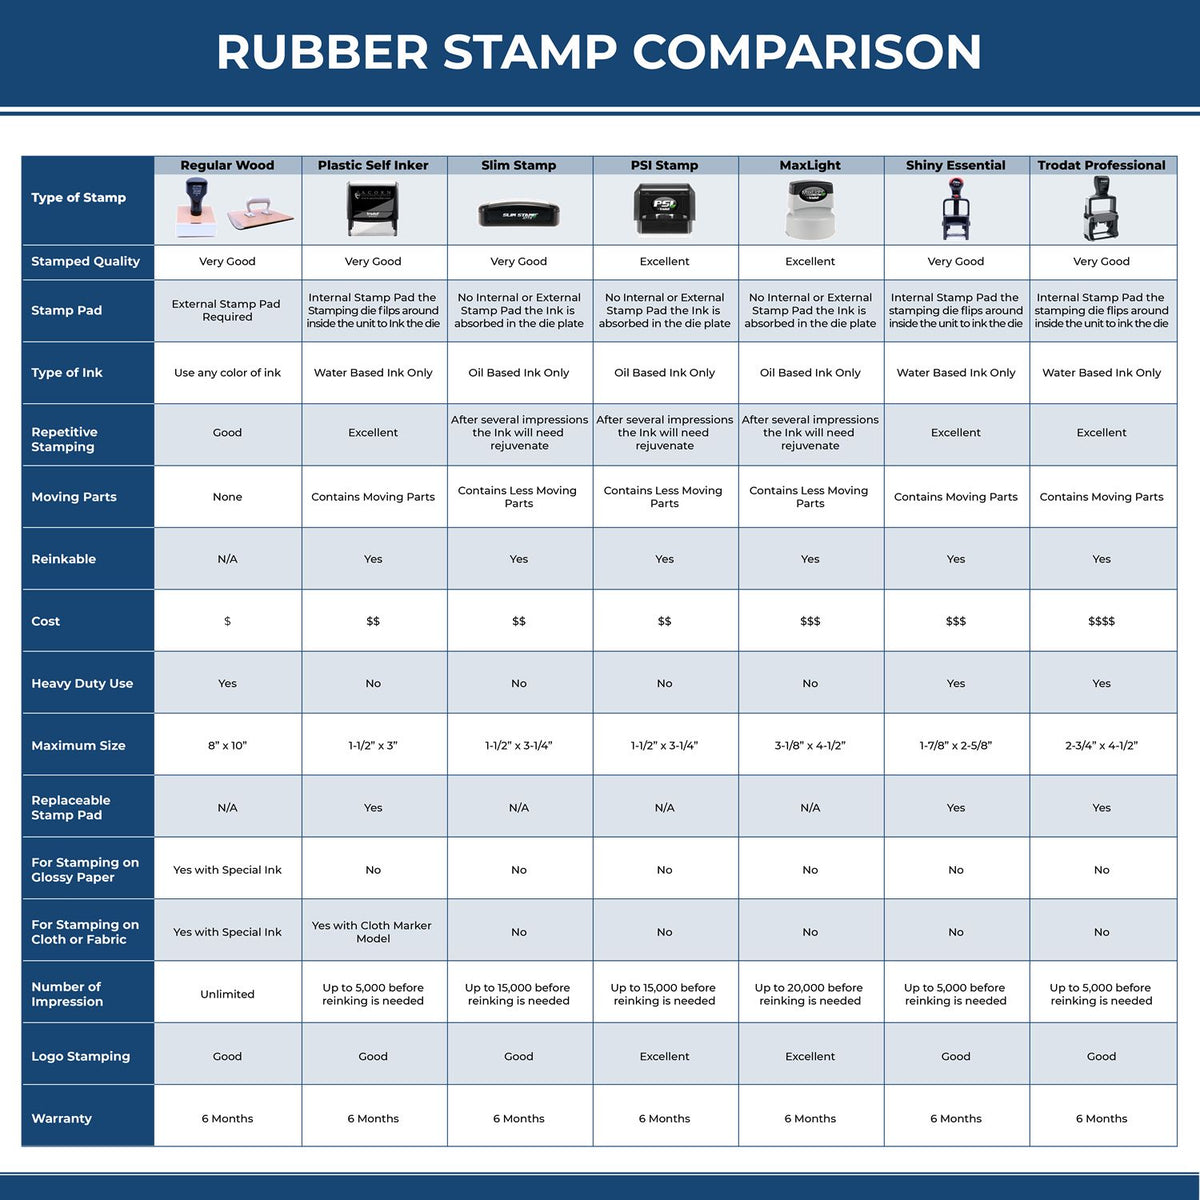 Large Self-Inking Official Stamp 4944S Rubber Stamp Comparison